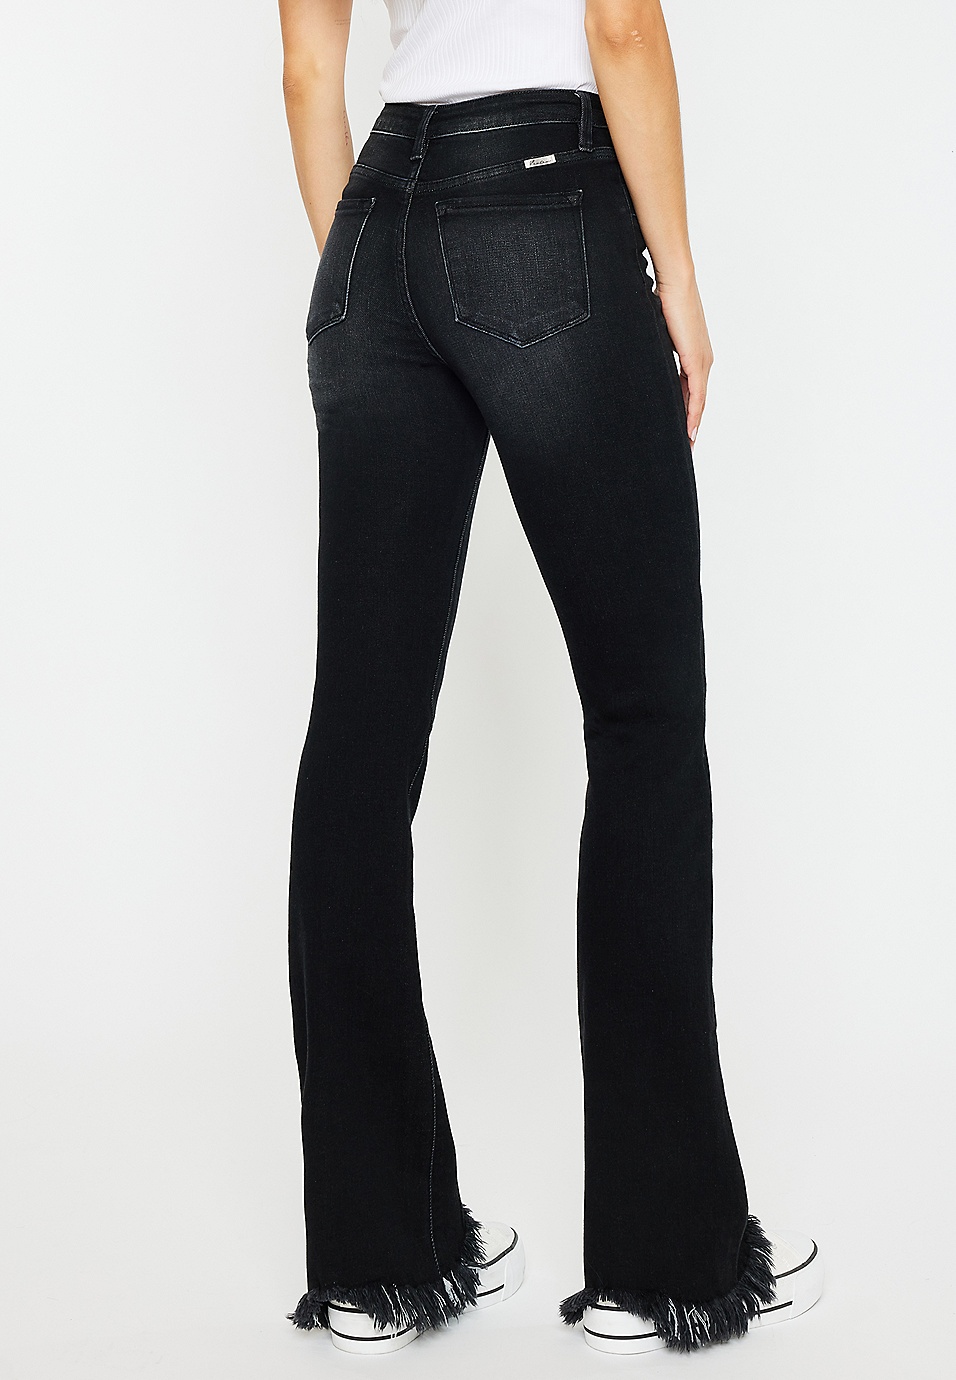 KanCan: Over The Moon High Rise Black Flare Jeans – Shop the Mint